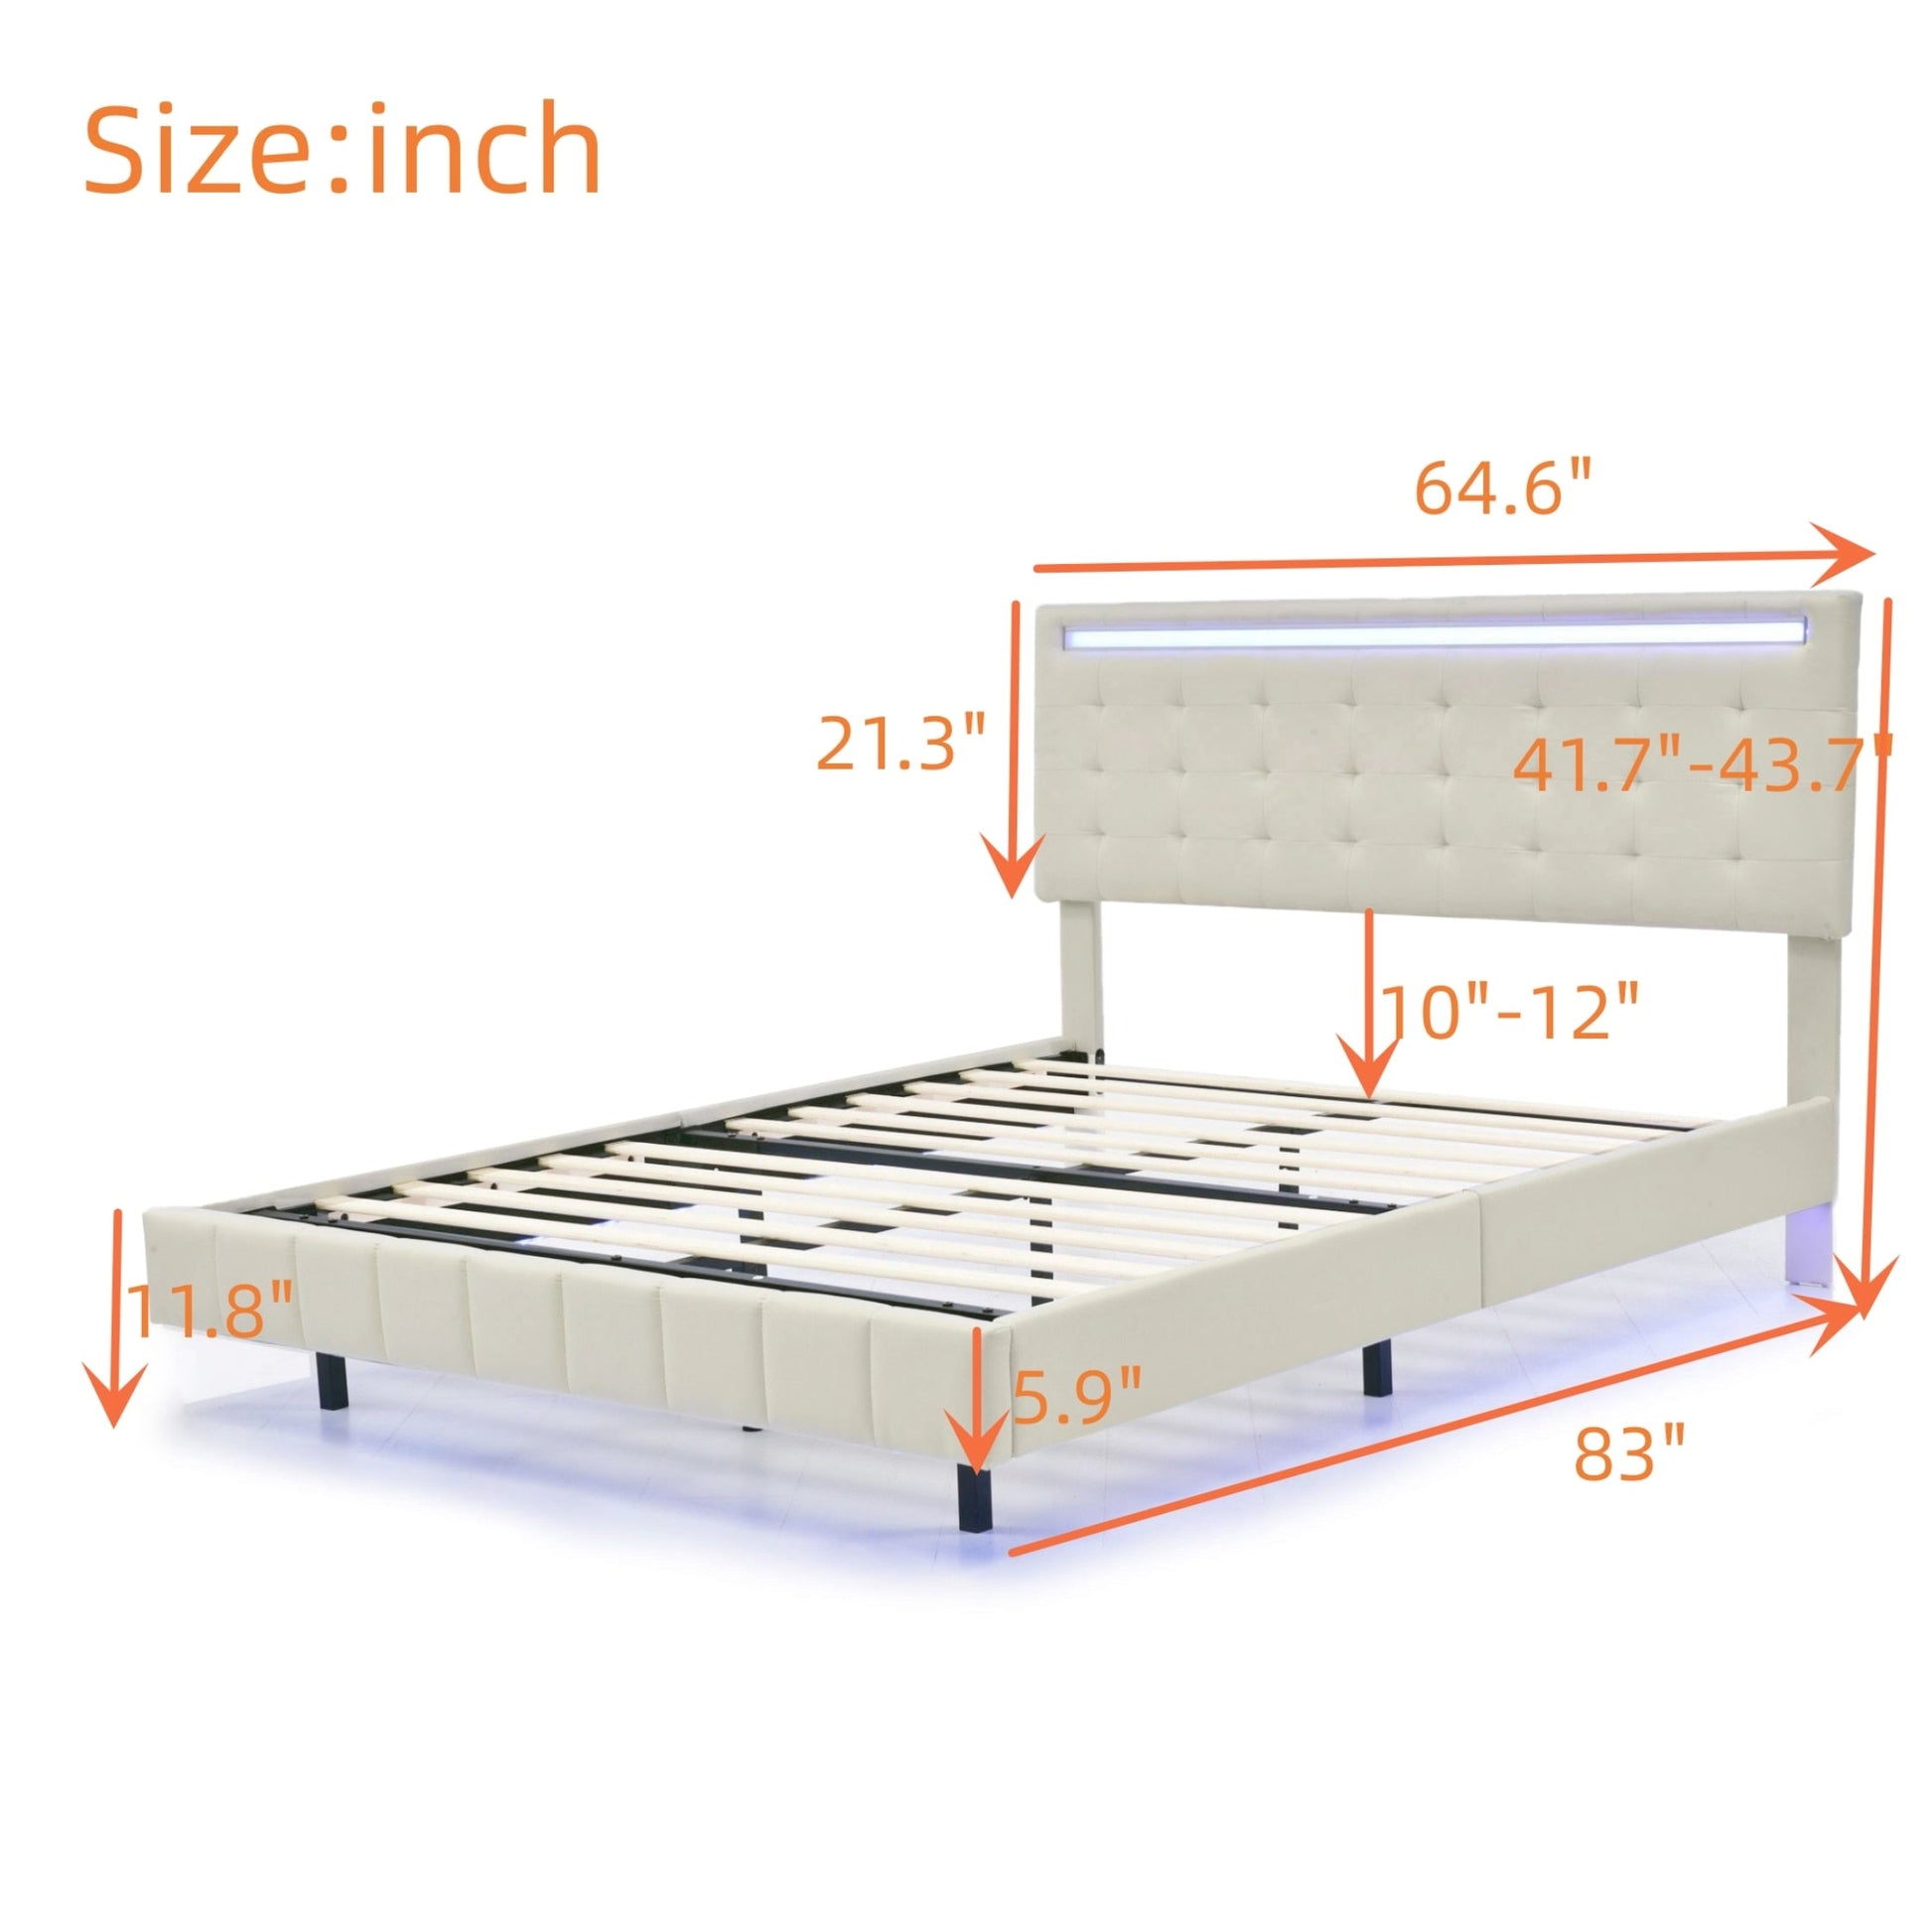 Queen Sized Floating Bed Frame Dimensions